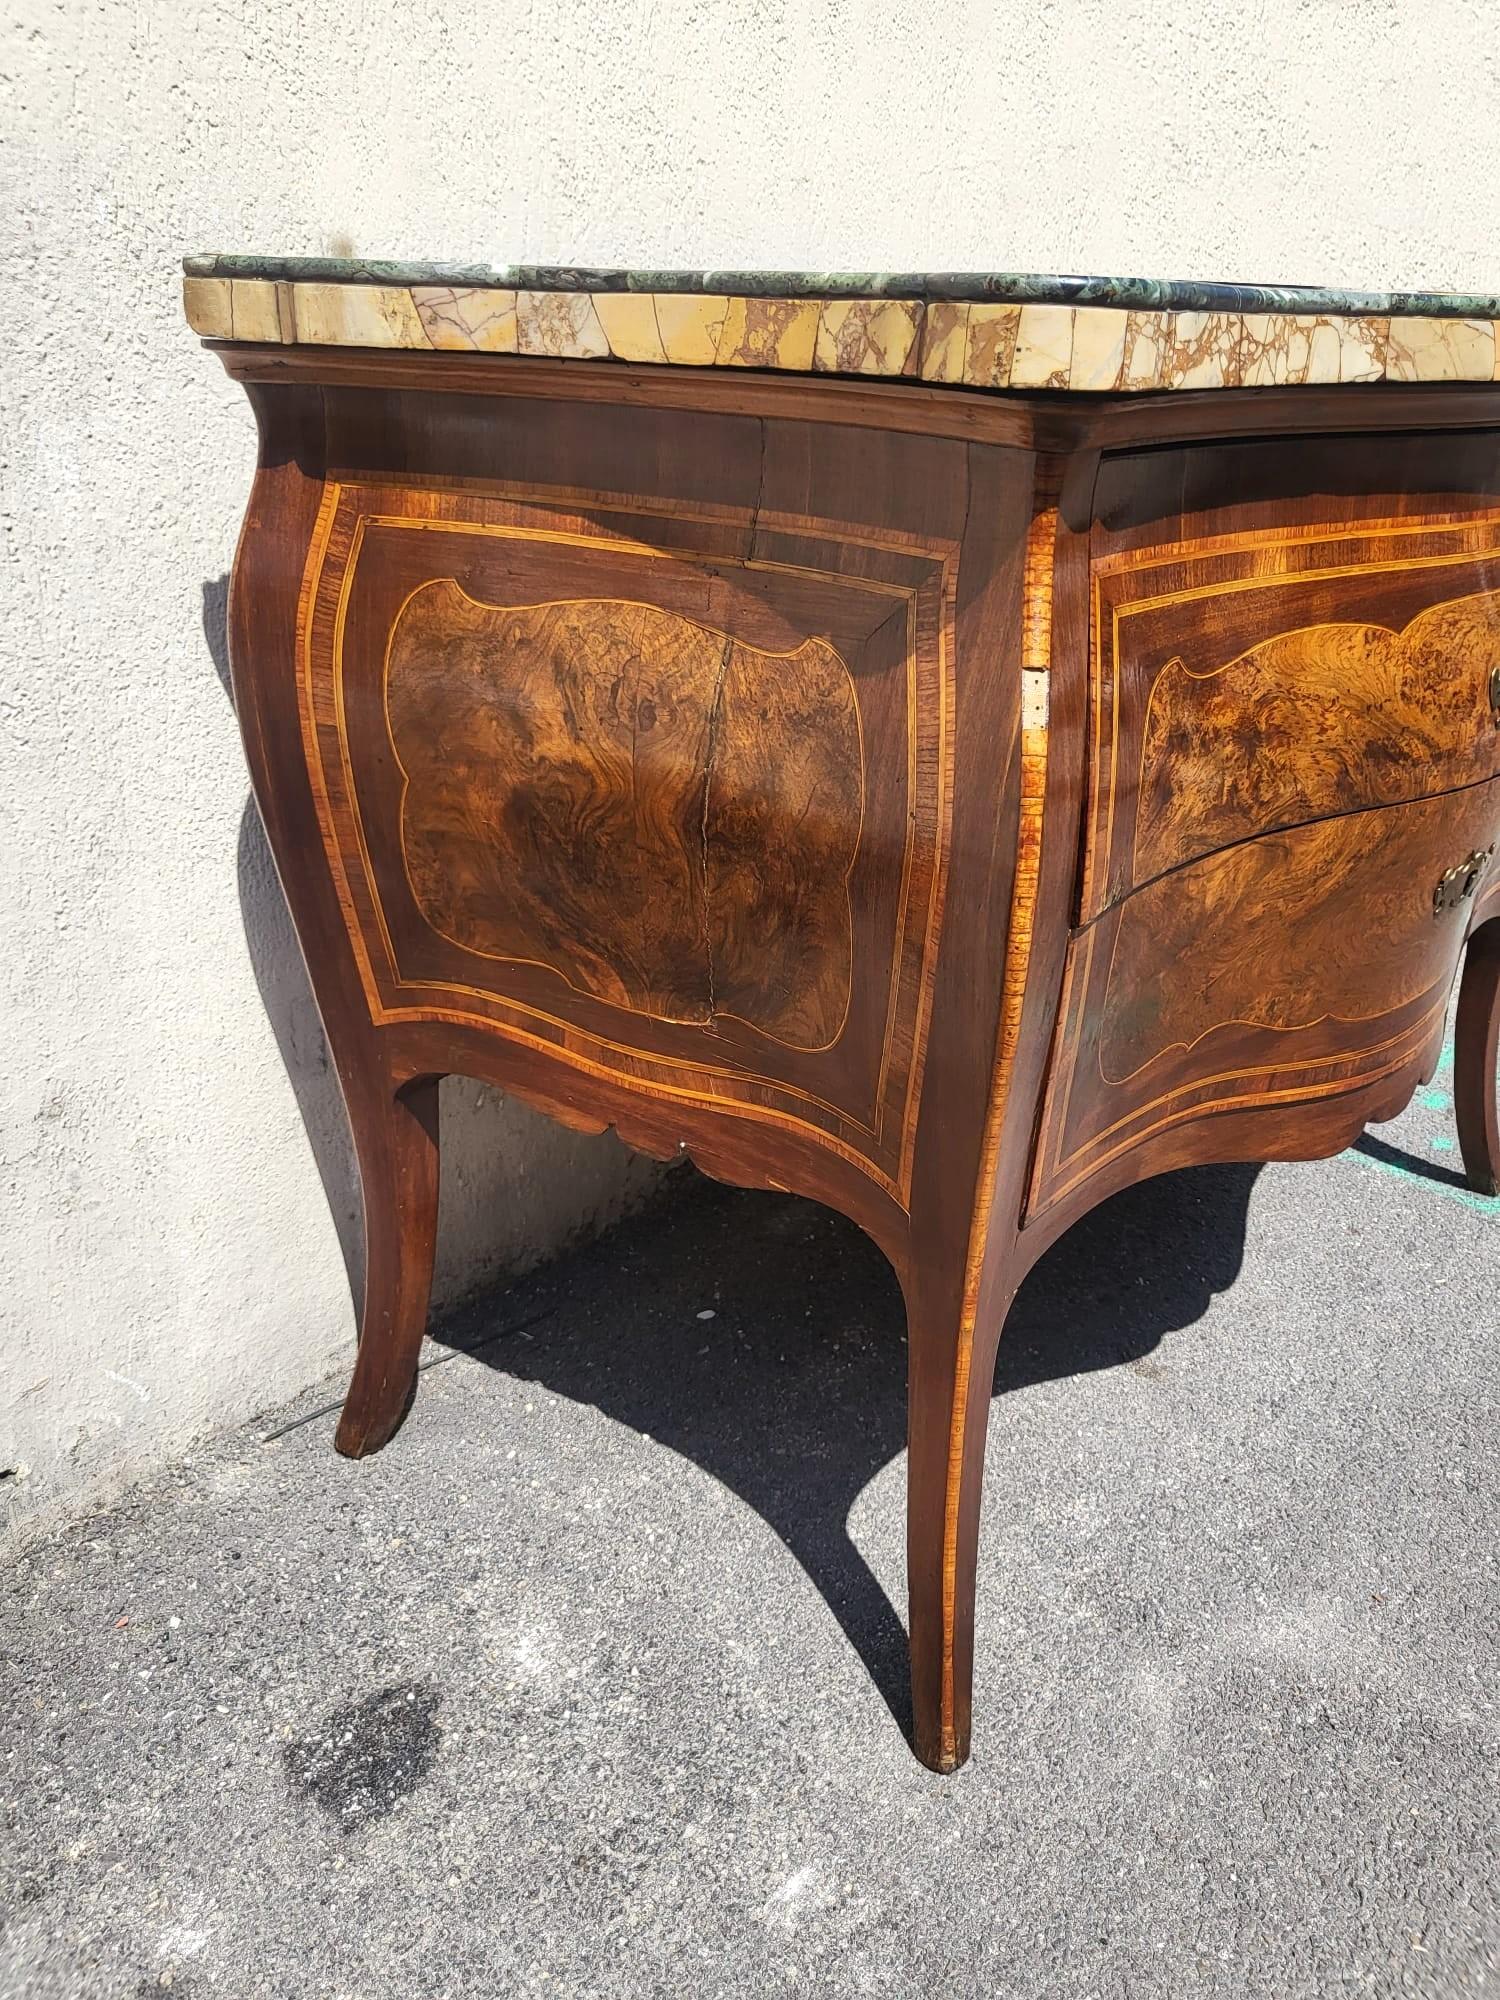 Louis XV Beautiful Roman Marquetry Commode, 18th Century Period For Sale